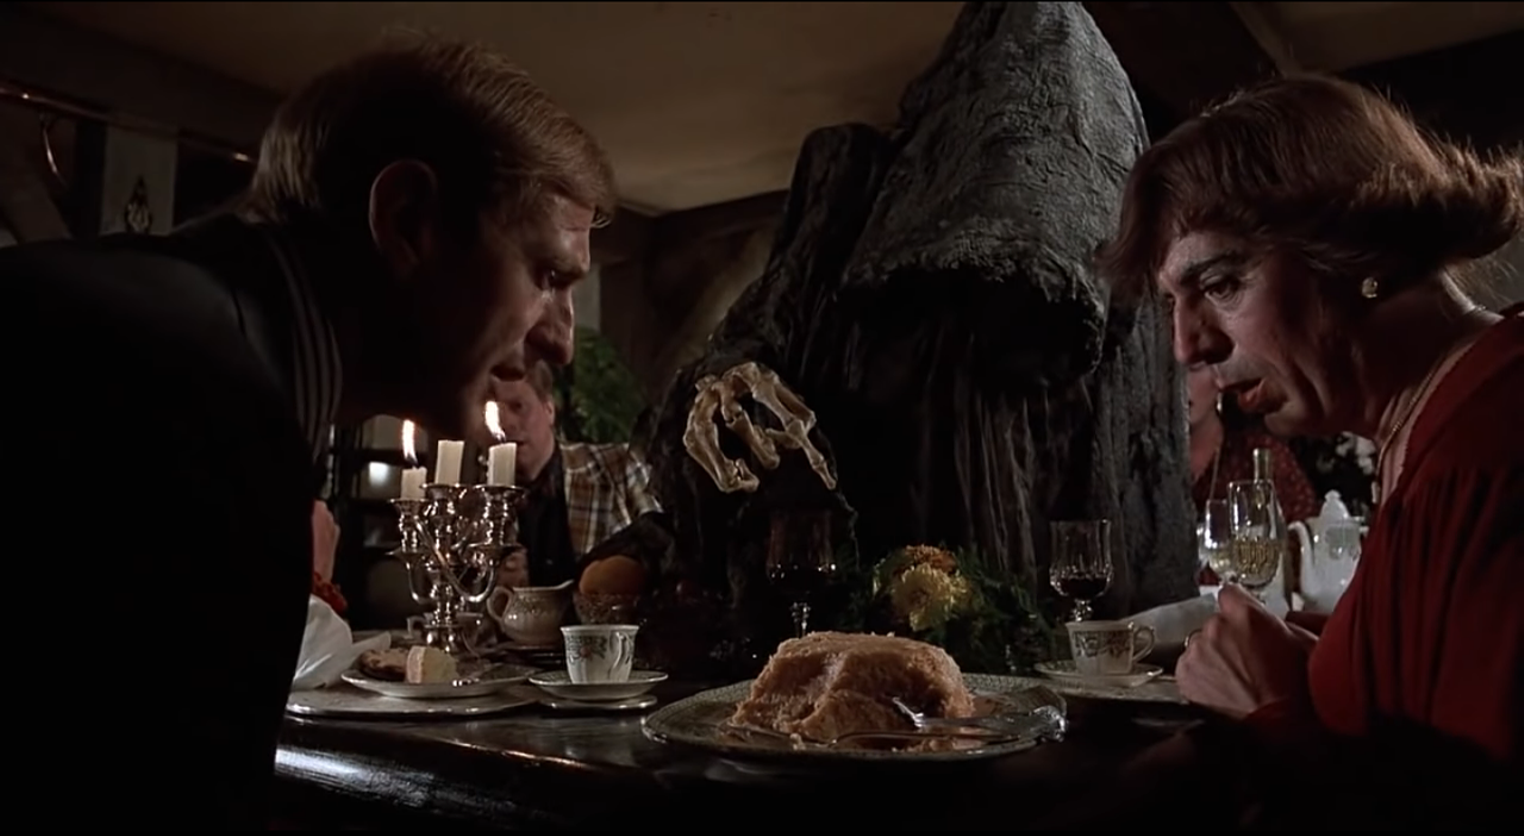 "It was the salmon mousse" says the Grim Reaper in Monty Python's The Meaning Of Life